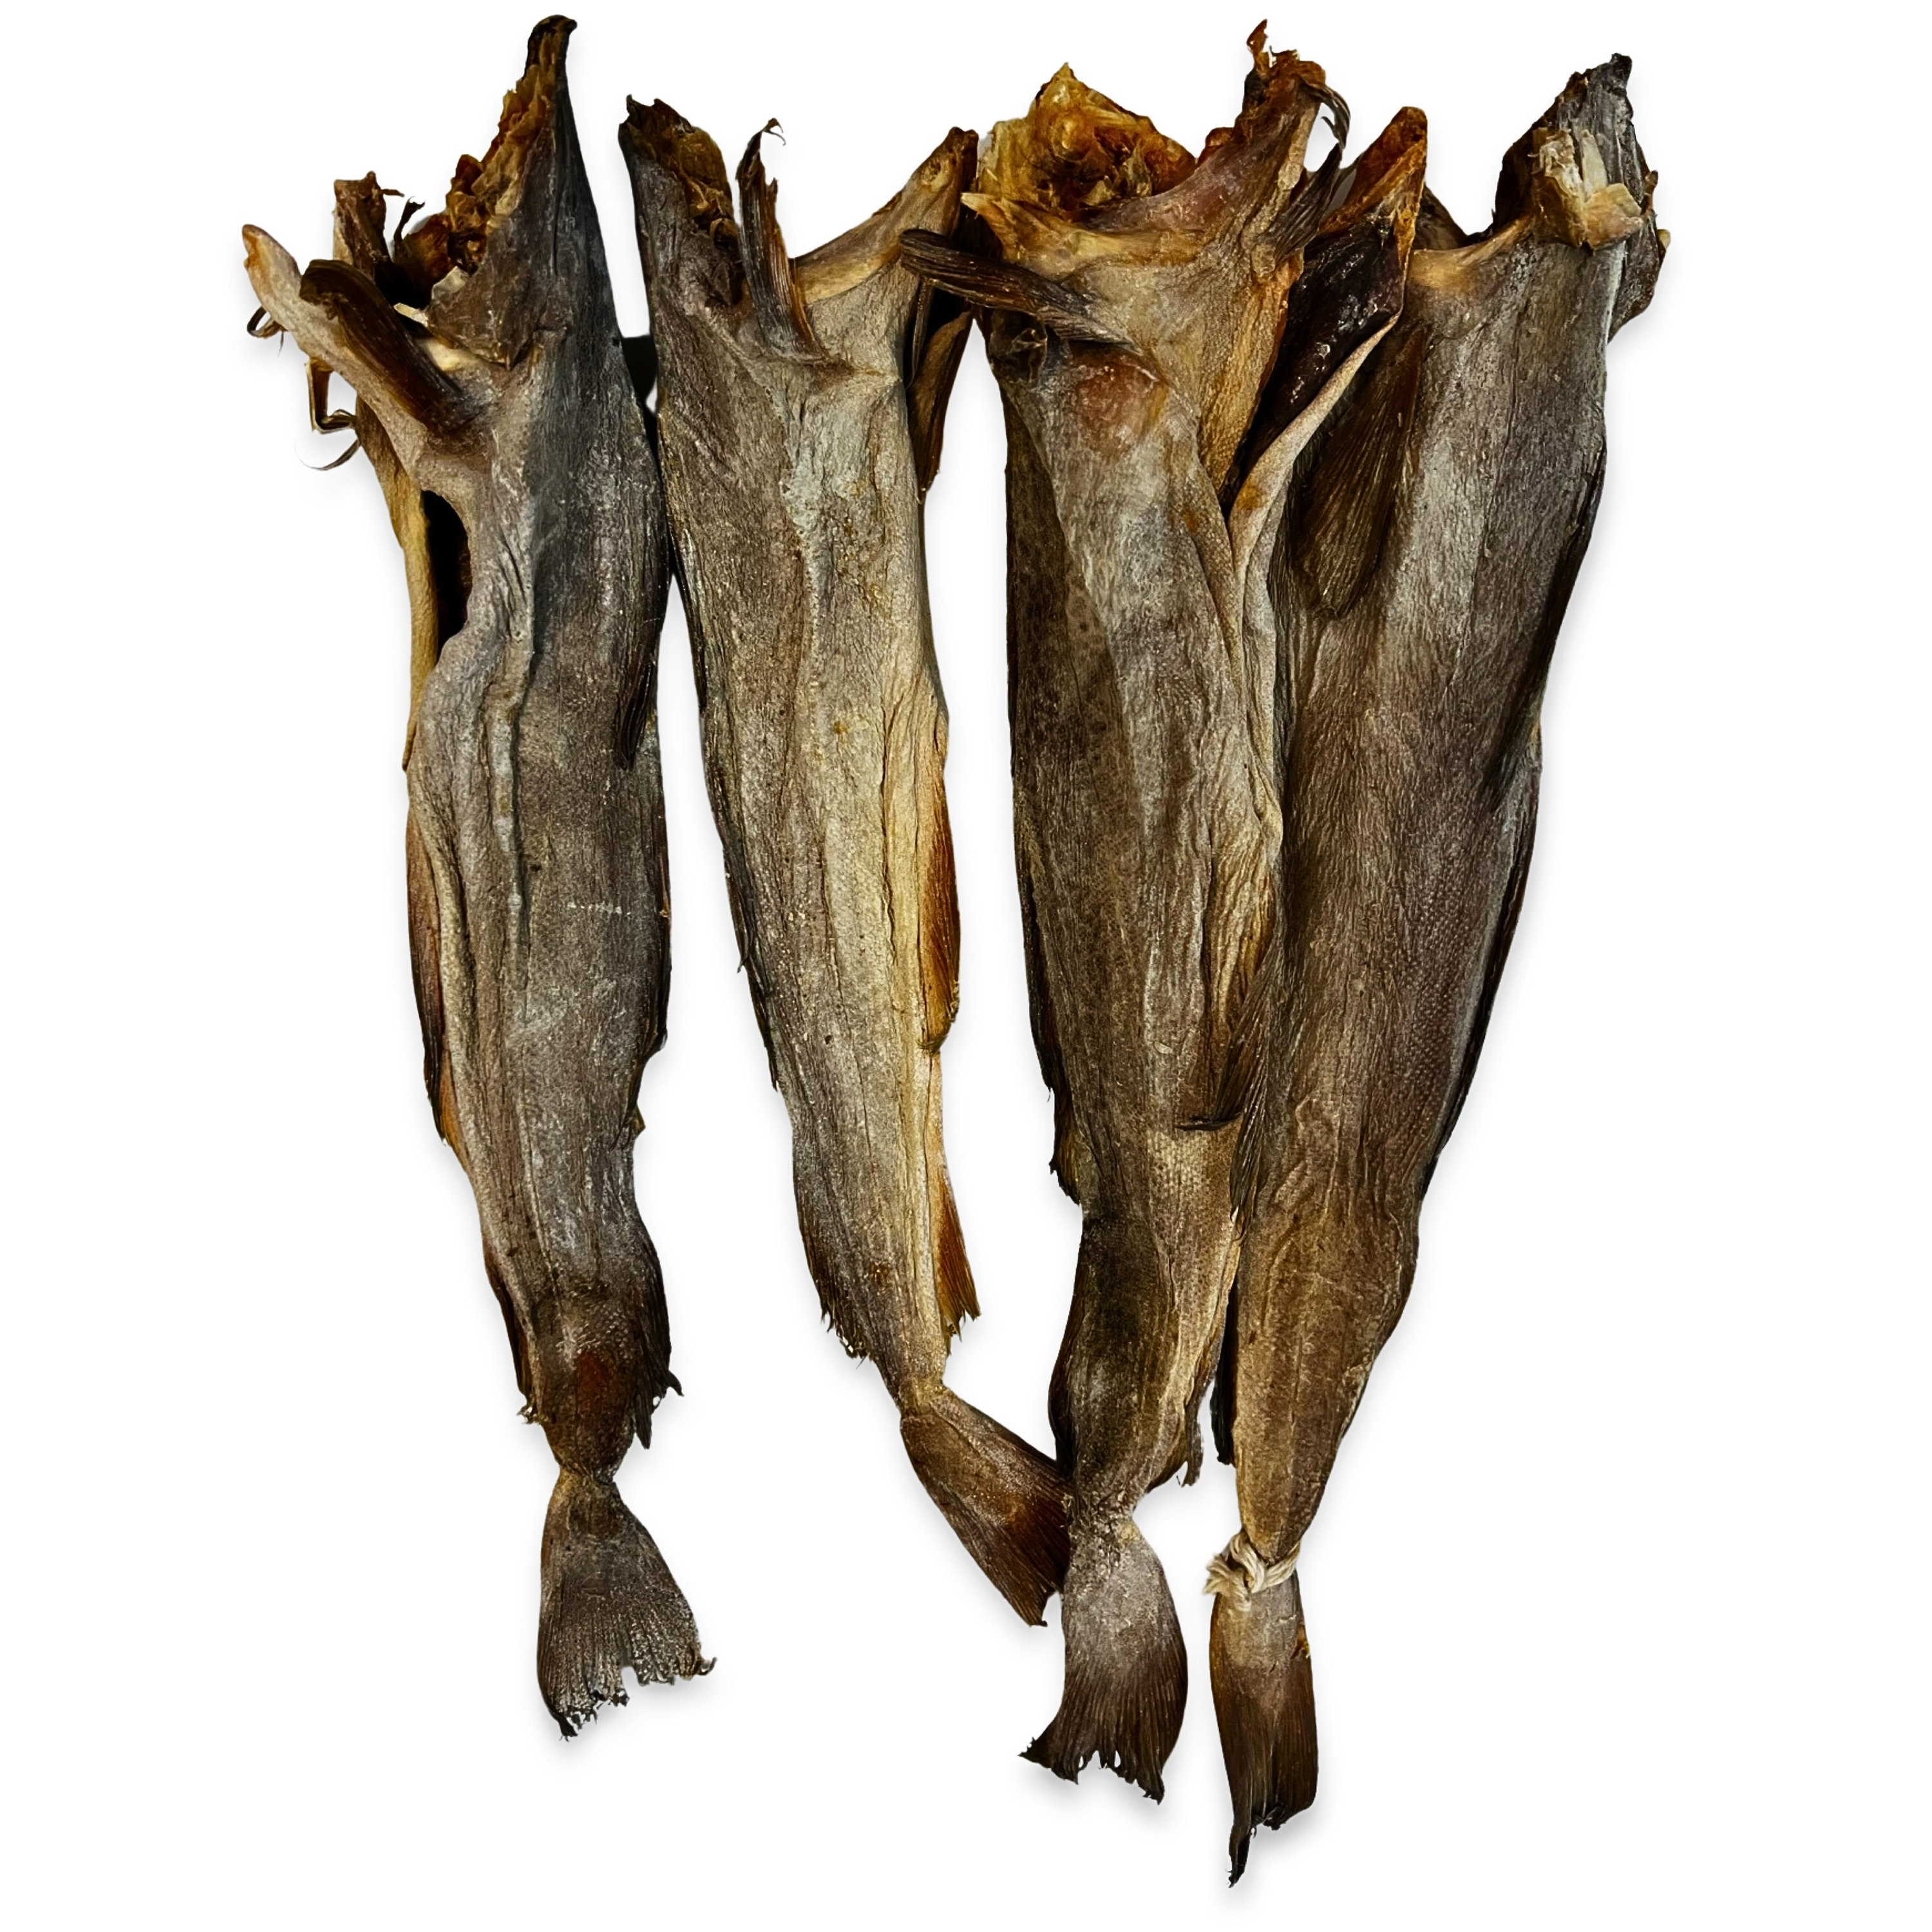 Stockfish, Stoccafisso Dried, Large Size, Appox 2 - 2.5 LB